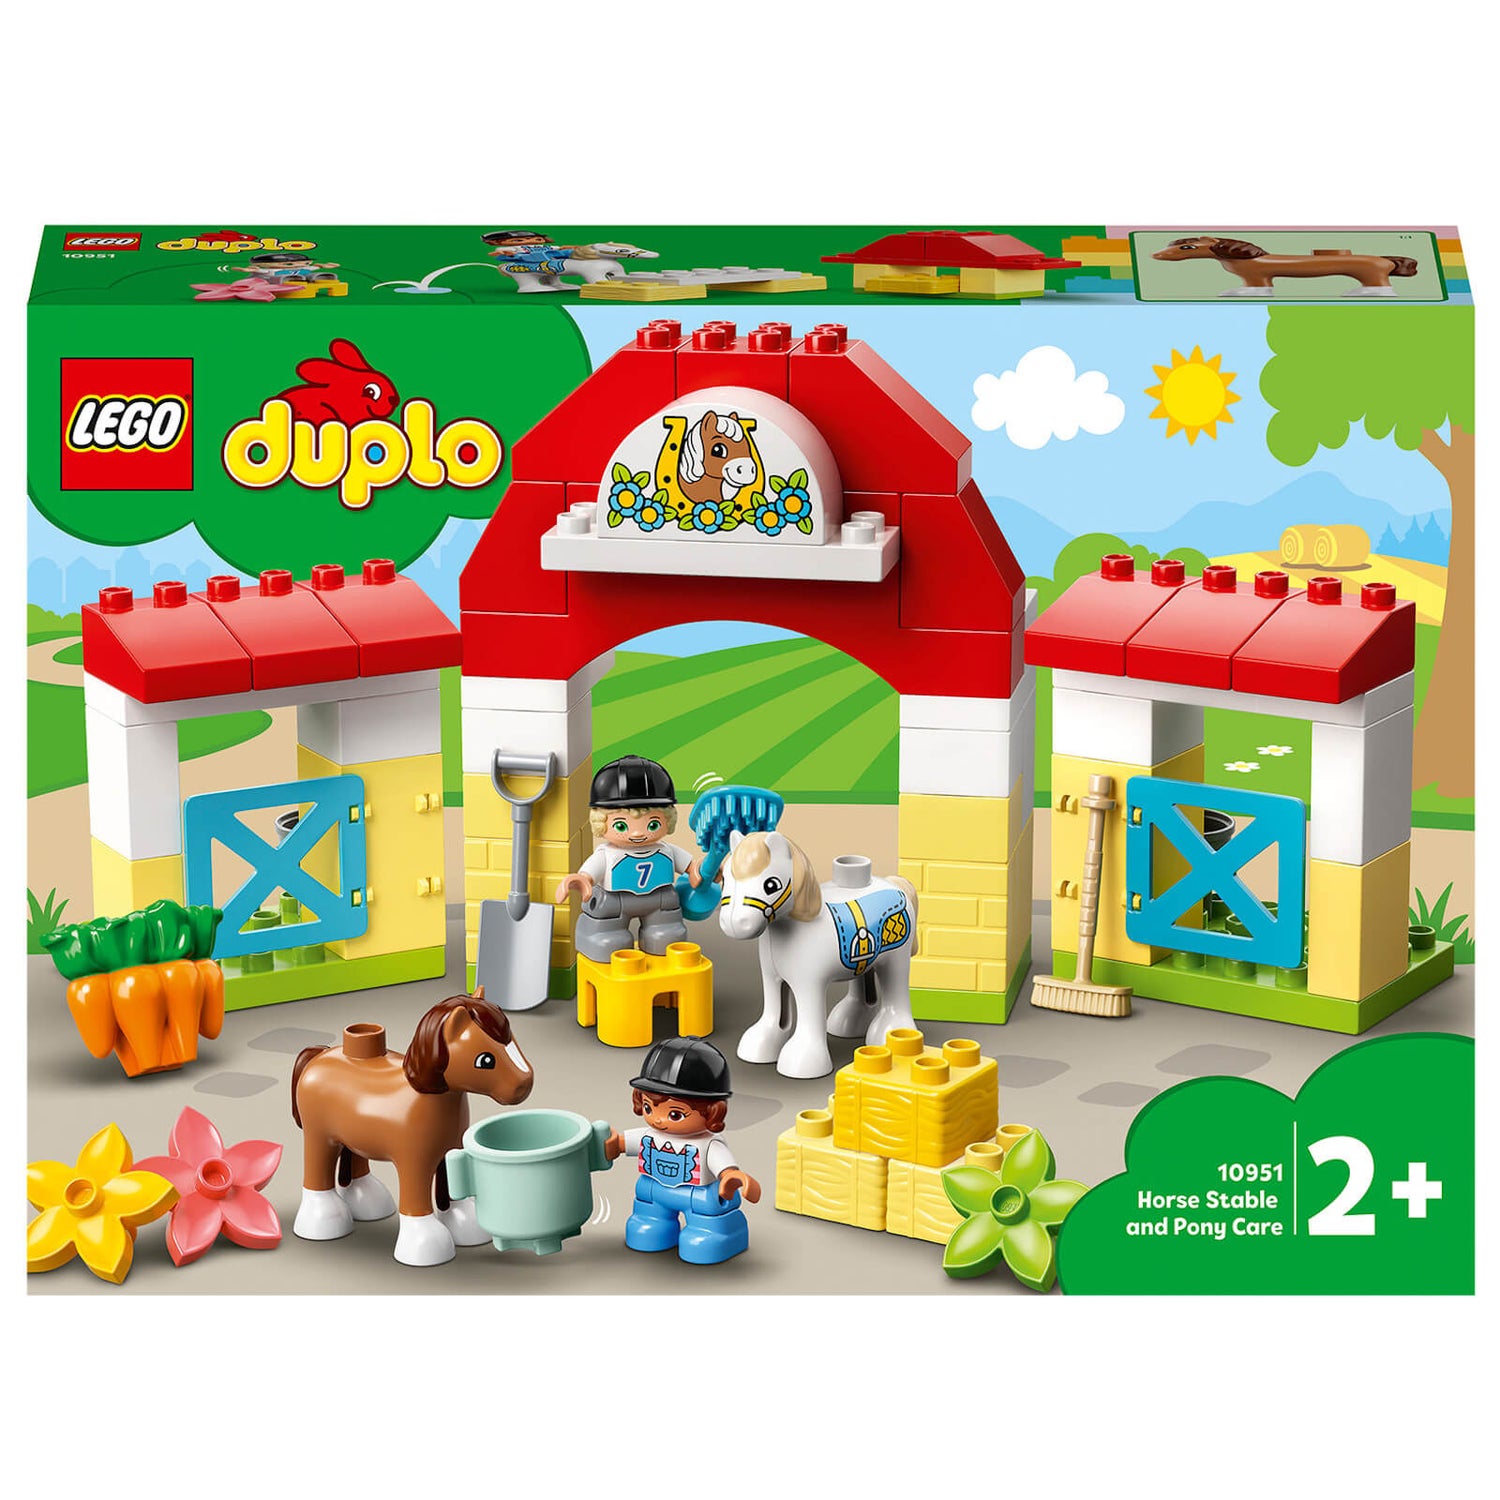 LEGO DUPLO Town: Horse Stable and Pony Care Toddler Toy (10951)